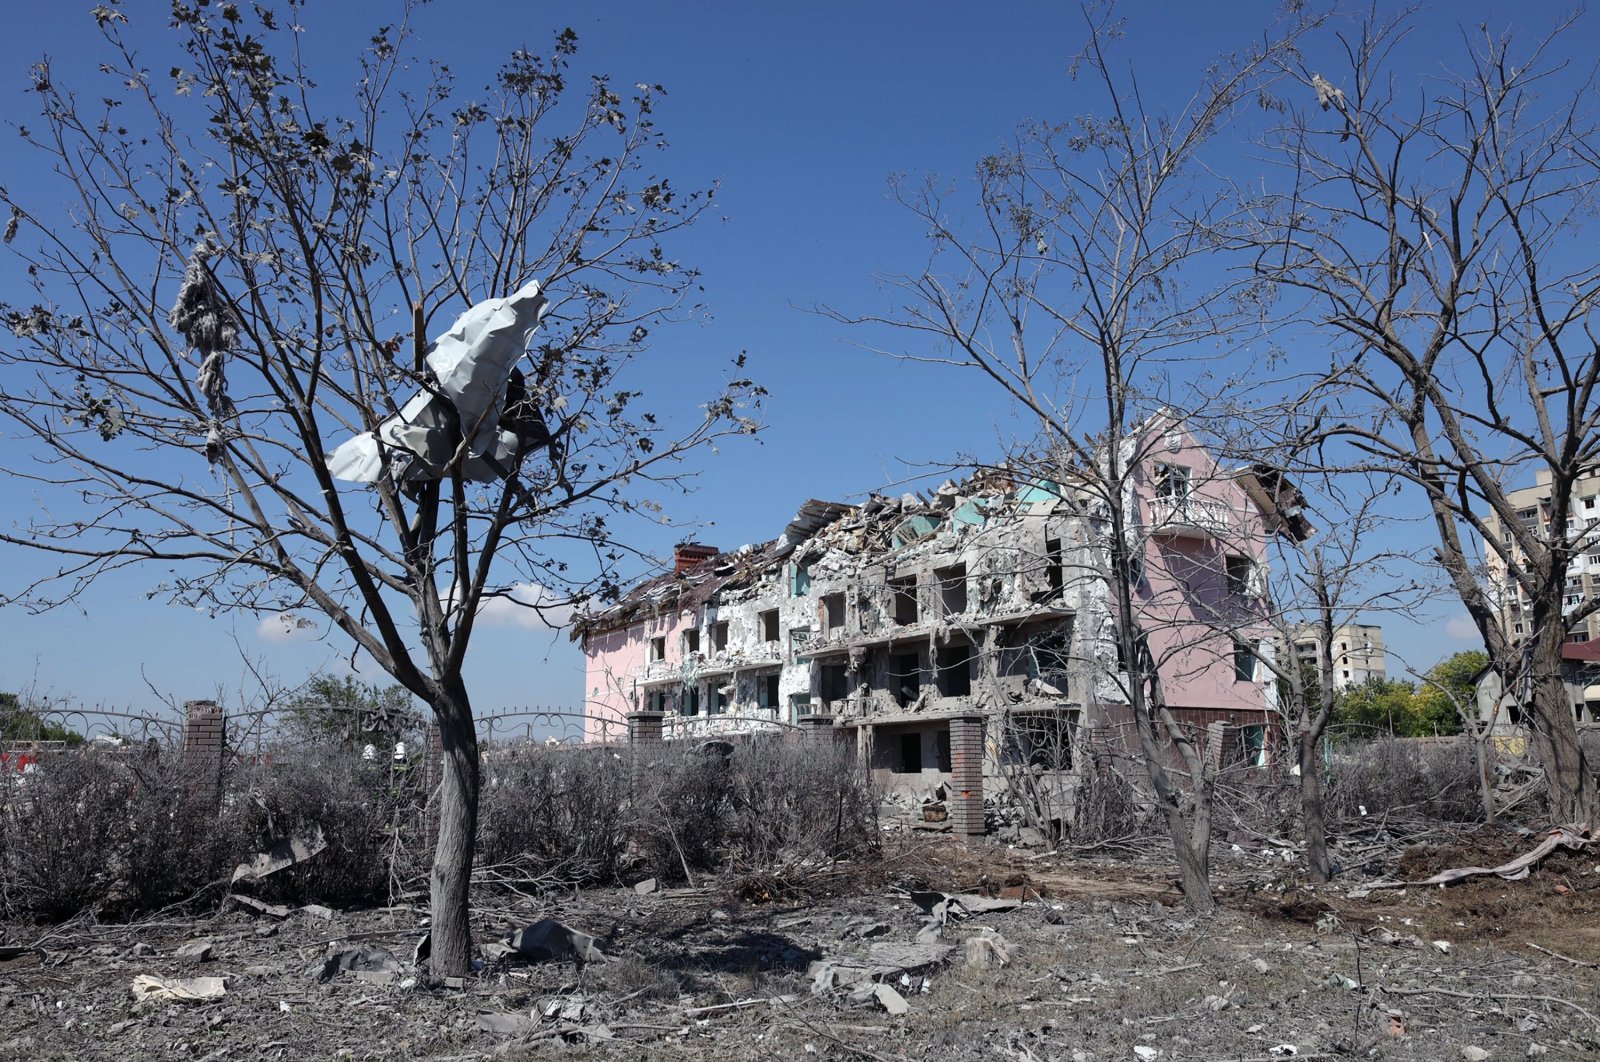 A general view of a destroyed building after being hit by a missile strike in the Ukrainian town of Serhiivka, near Odessa, Ukraine, July 1, 2022. (AFP Photo)